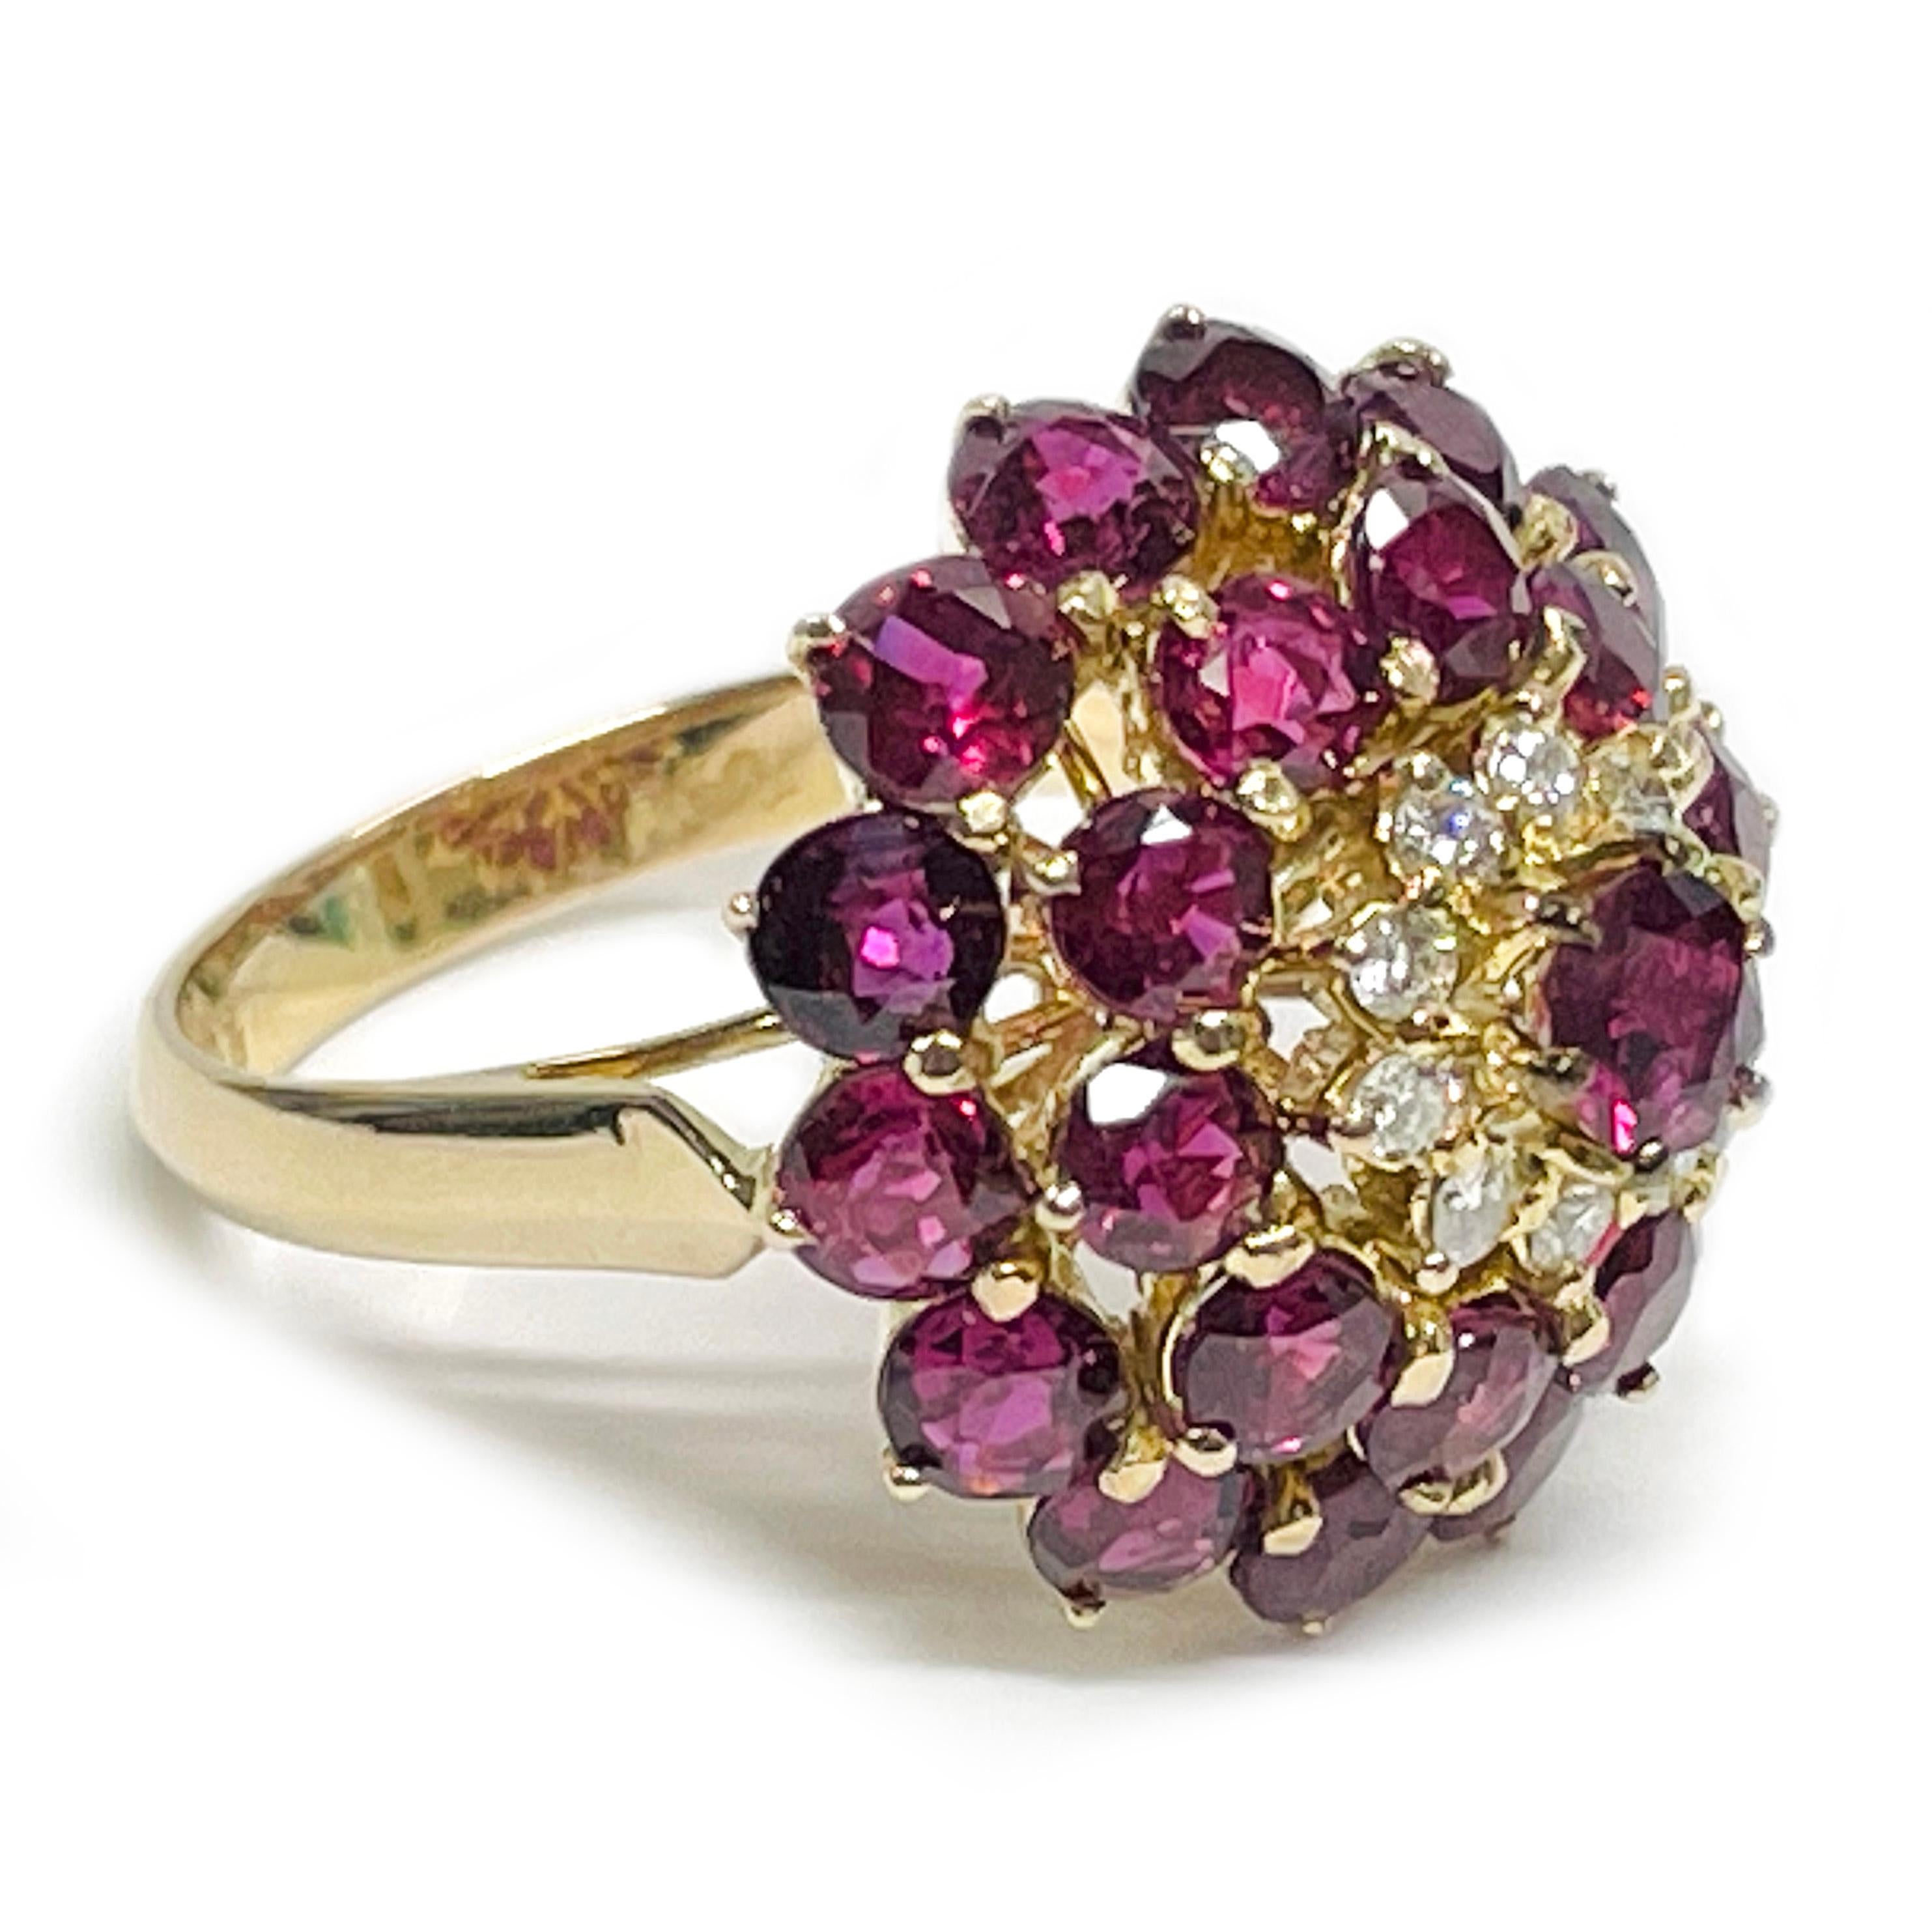 14 Karat Yellow Gold Ruby Diamond Cluster Ring. The cluster ring features twenty-five round rubies and ten round diamonds all prong-set in a dome formation. The rubies range in size from 3.1 to 3.3mm and have a total carat weight of 1.10ctw. The